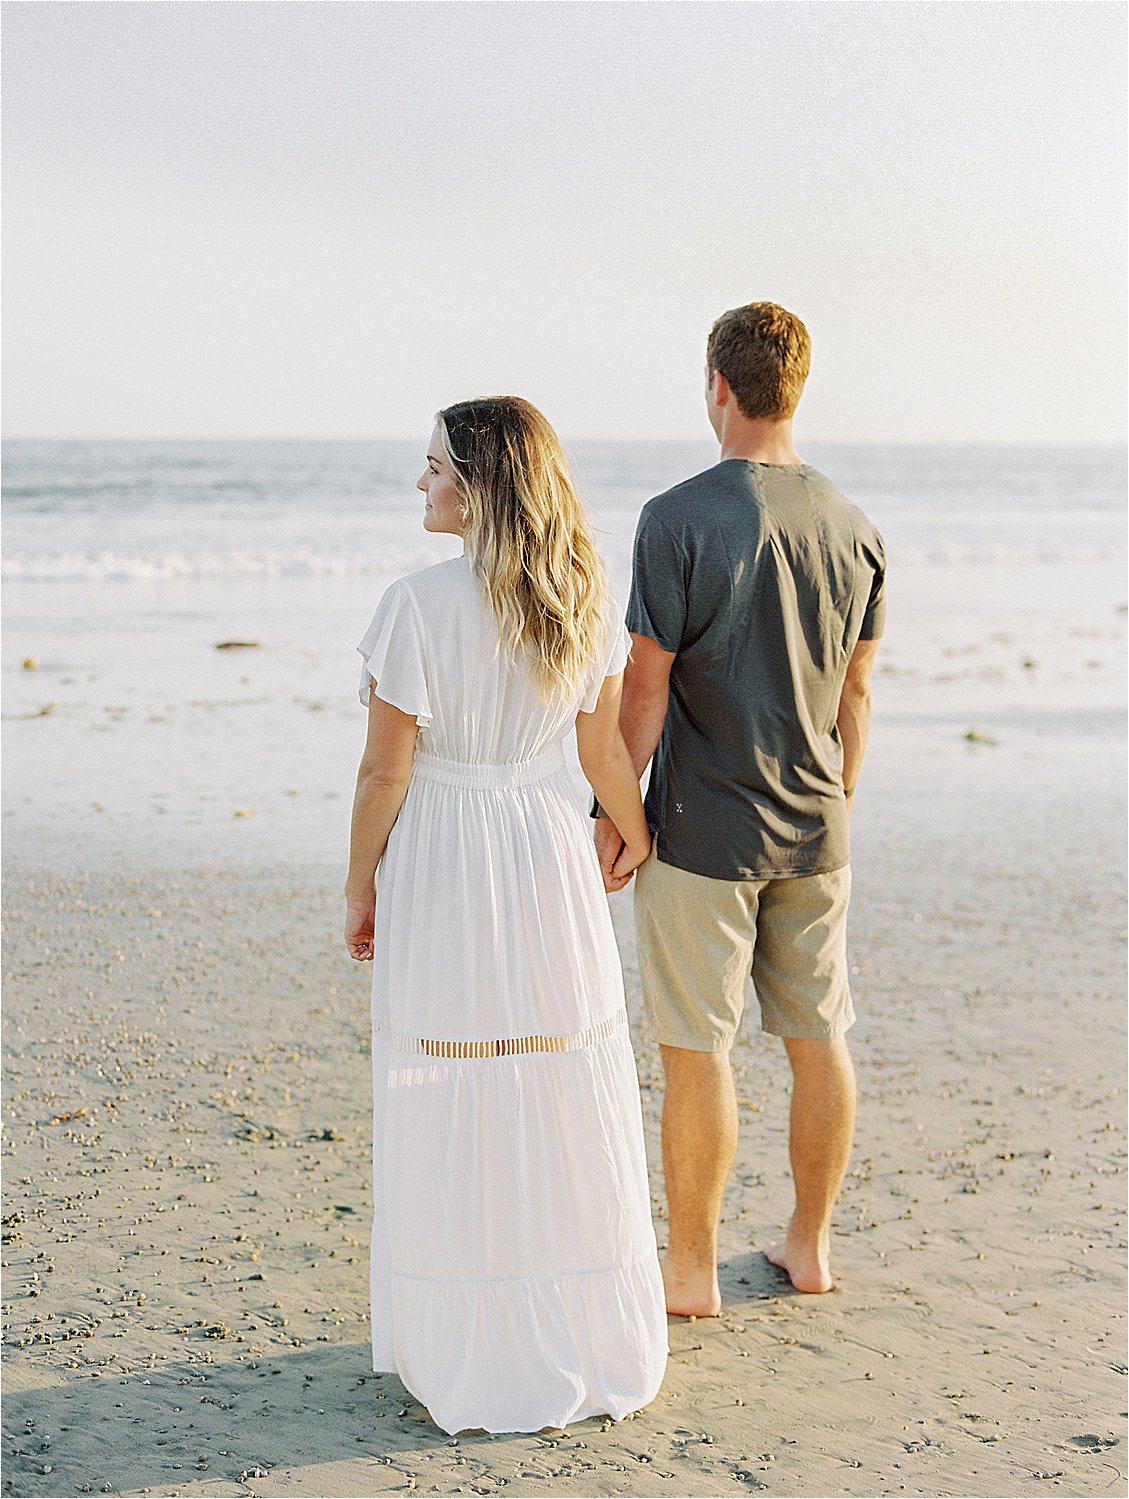 Golden Hour at Playful Coronado Island Beach Engagement Session with Southern California and Destination Film Wedding Photographer, Renee Hollingshead